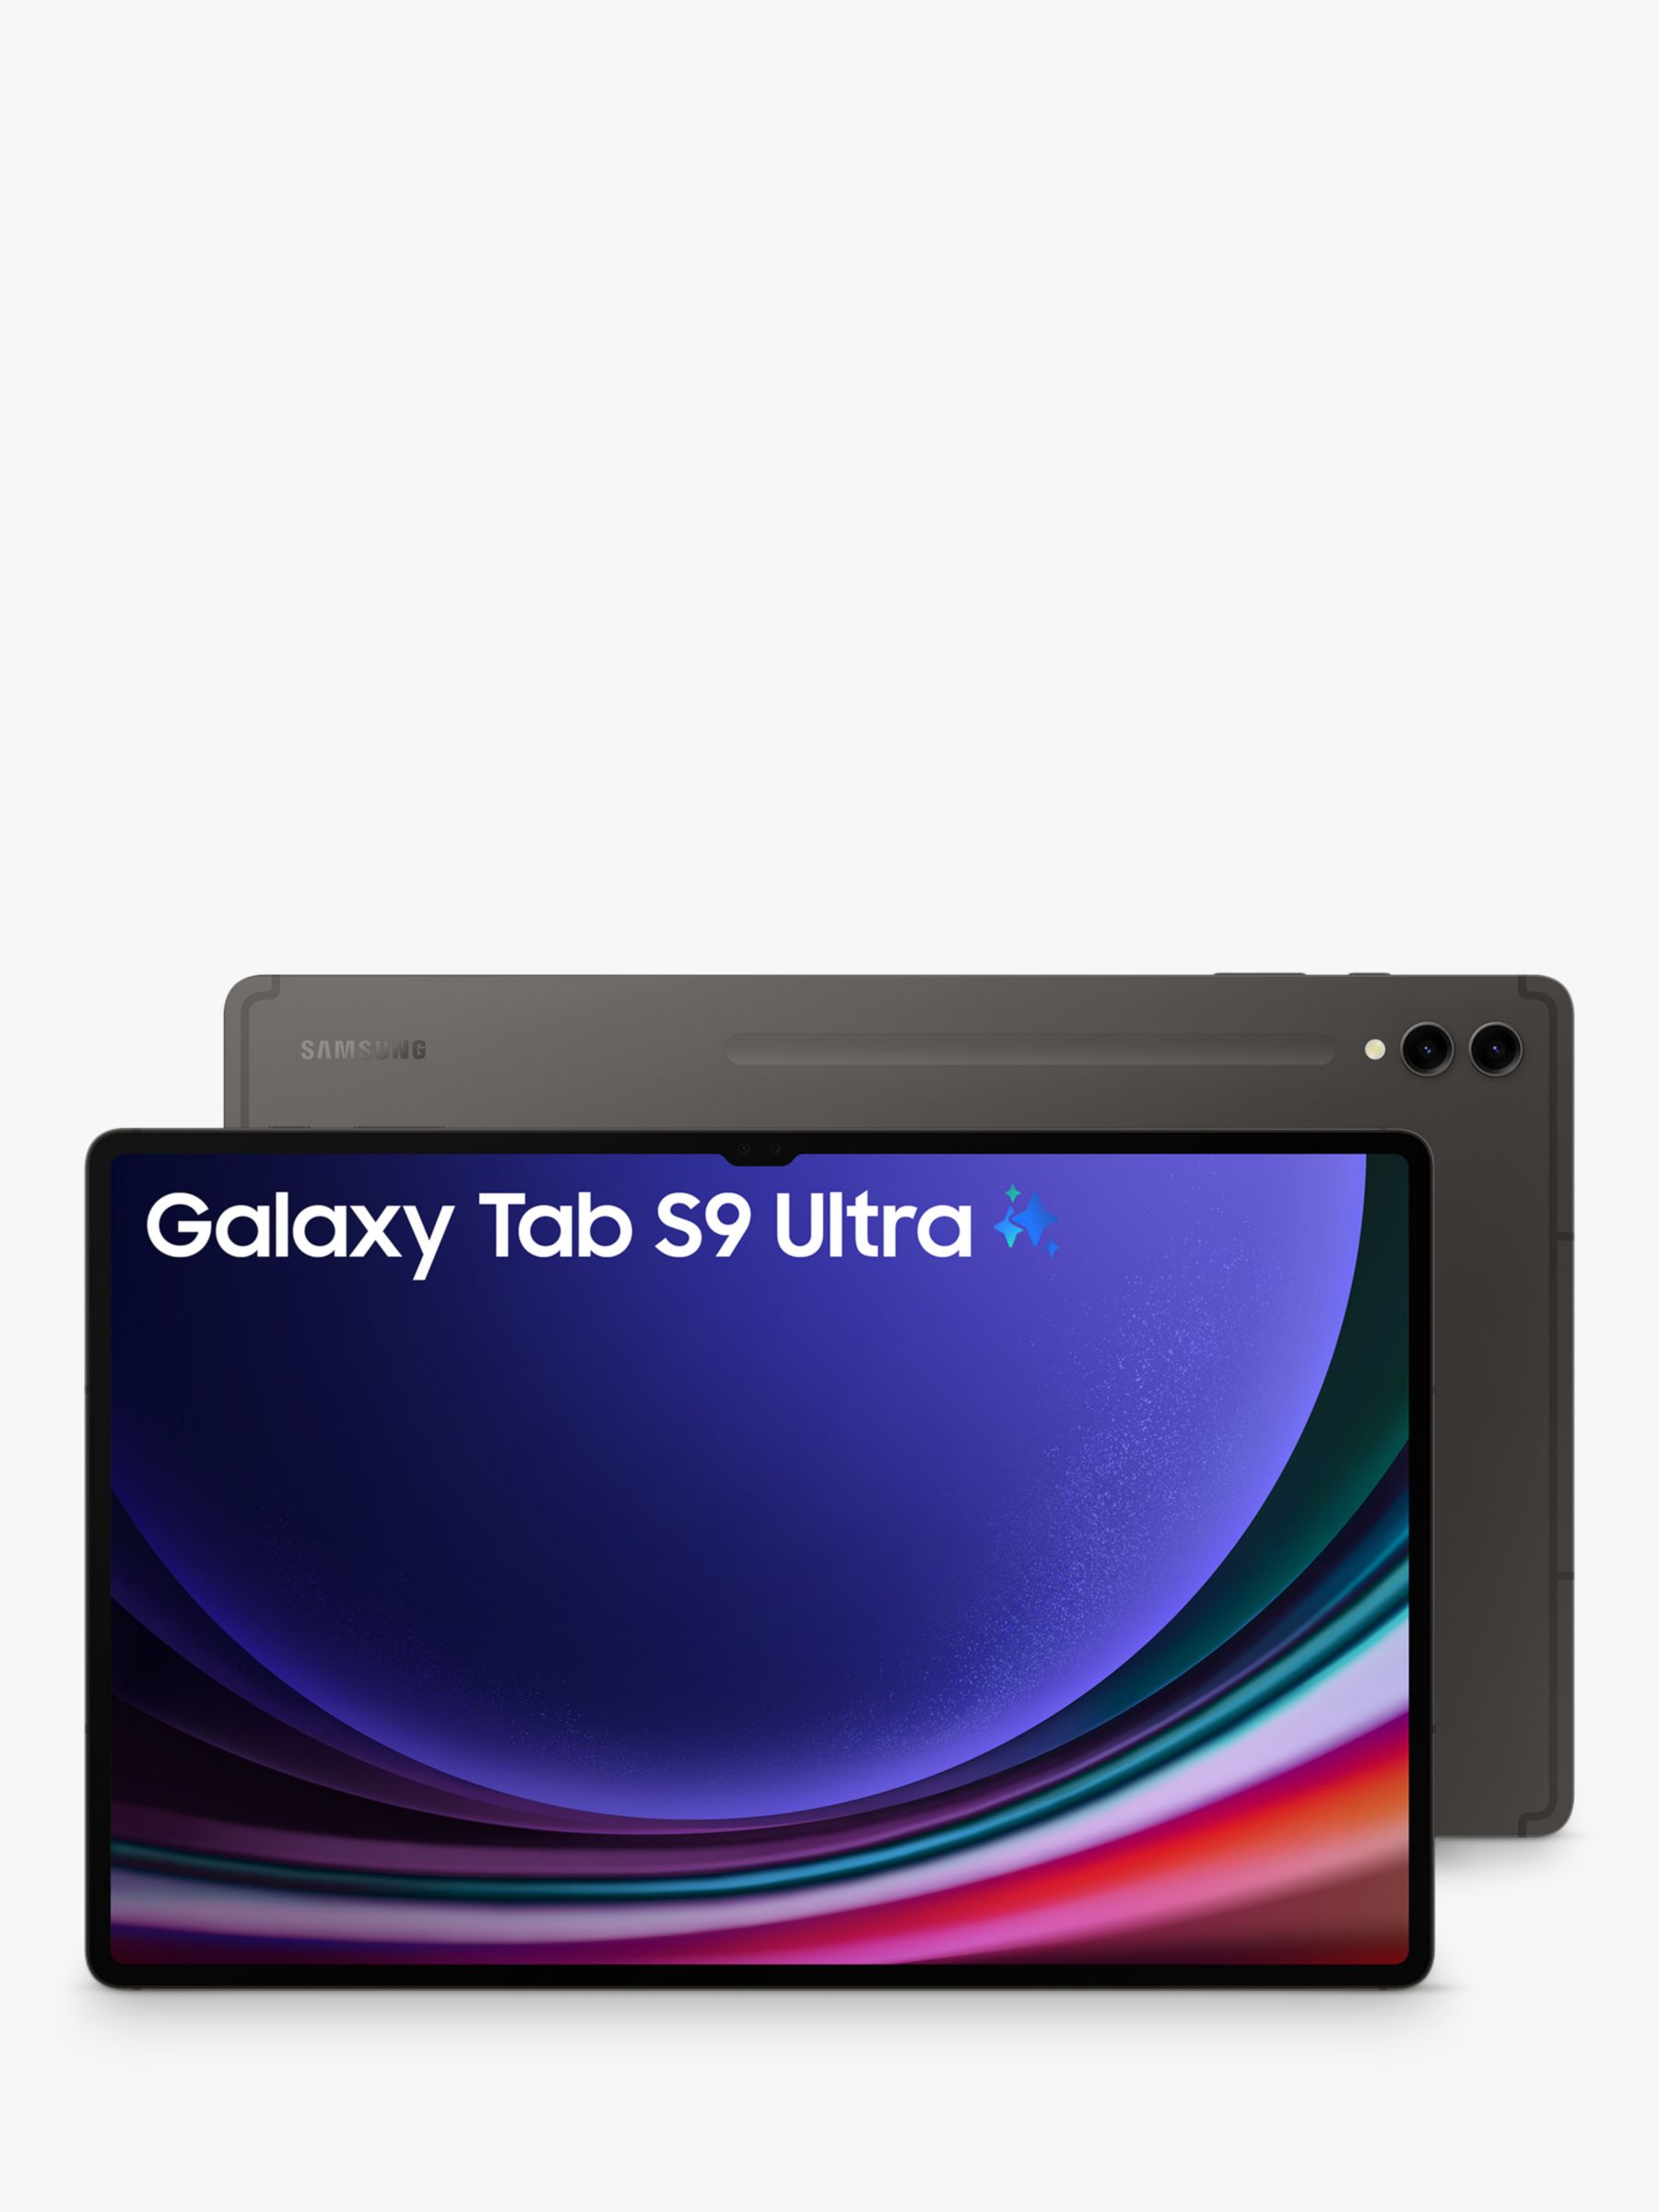 Samsung Galaxy Tab S9 Ultra Tablet with Bluetooth S Pen, Android